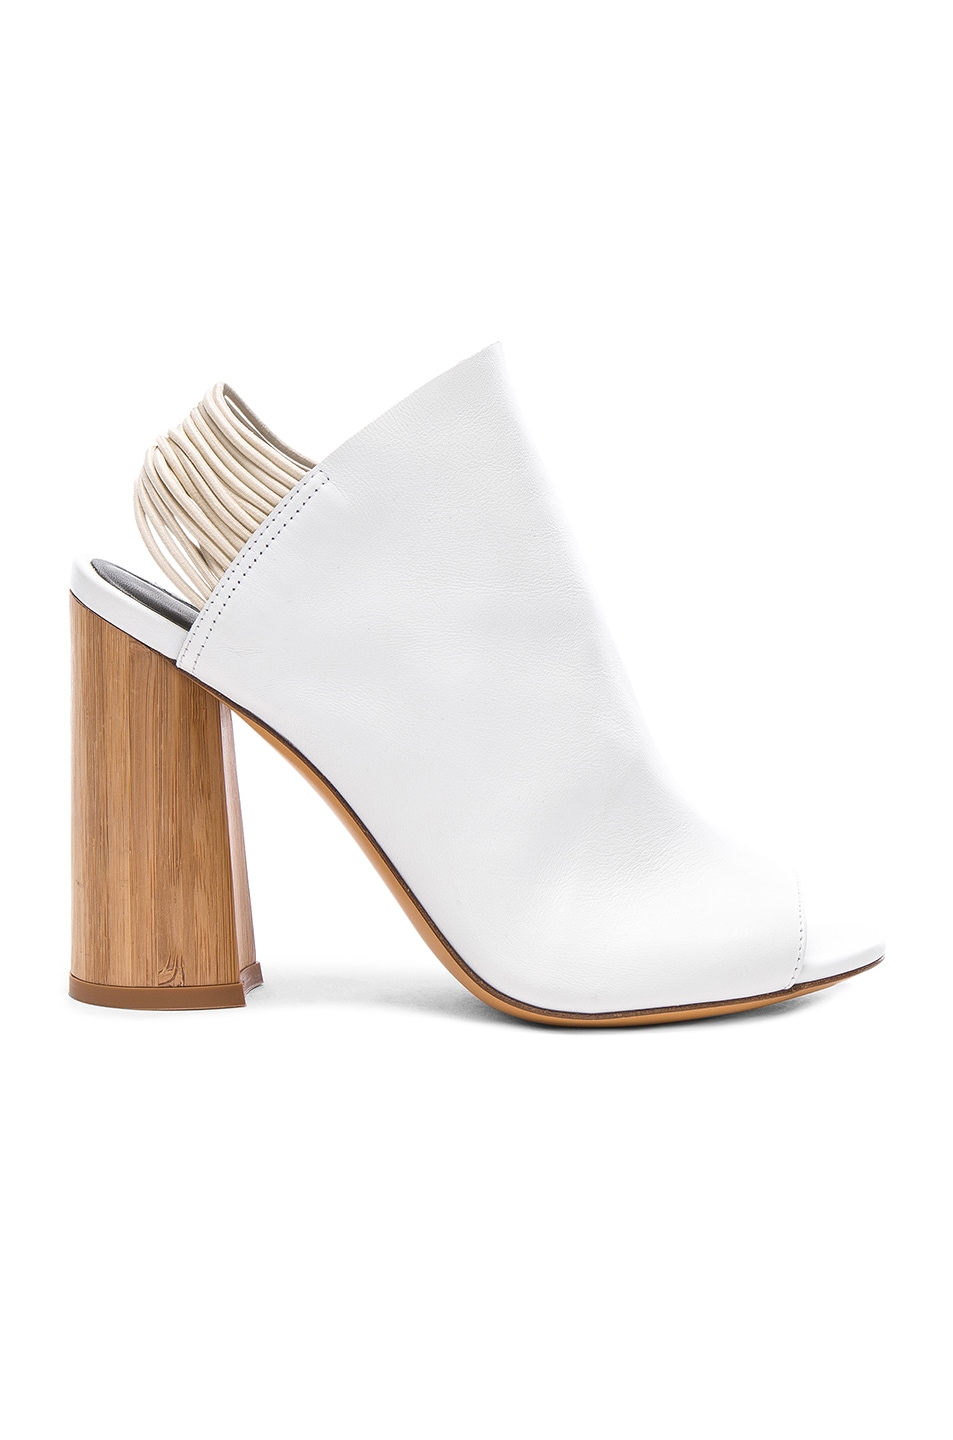 Image 1 of 3.1 phillip lim Leather Drum Glove Slingback Heels in White